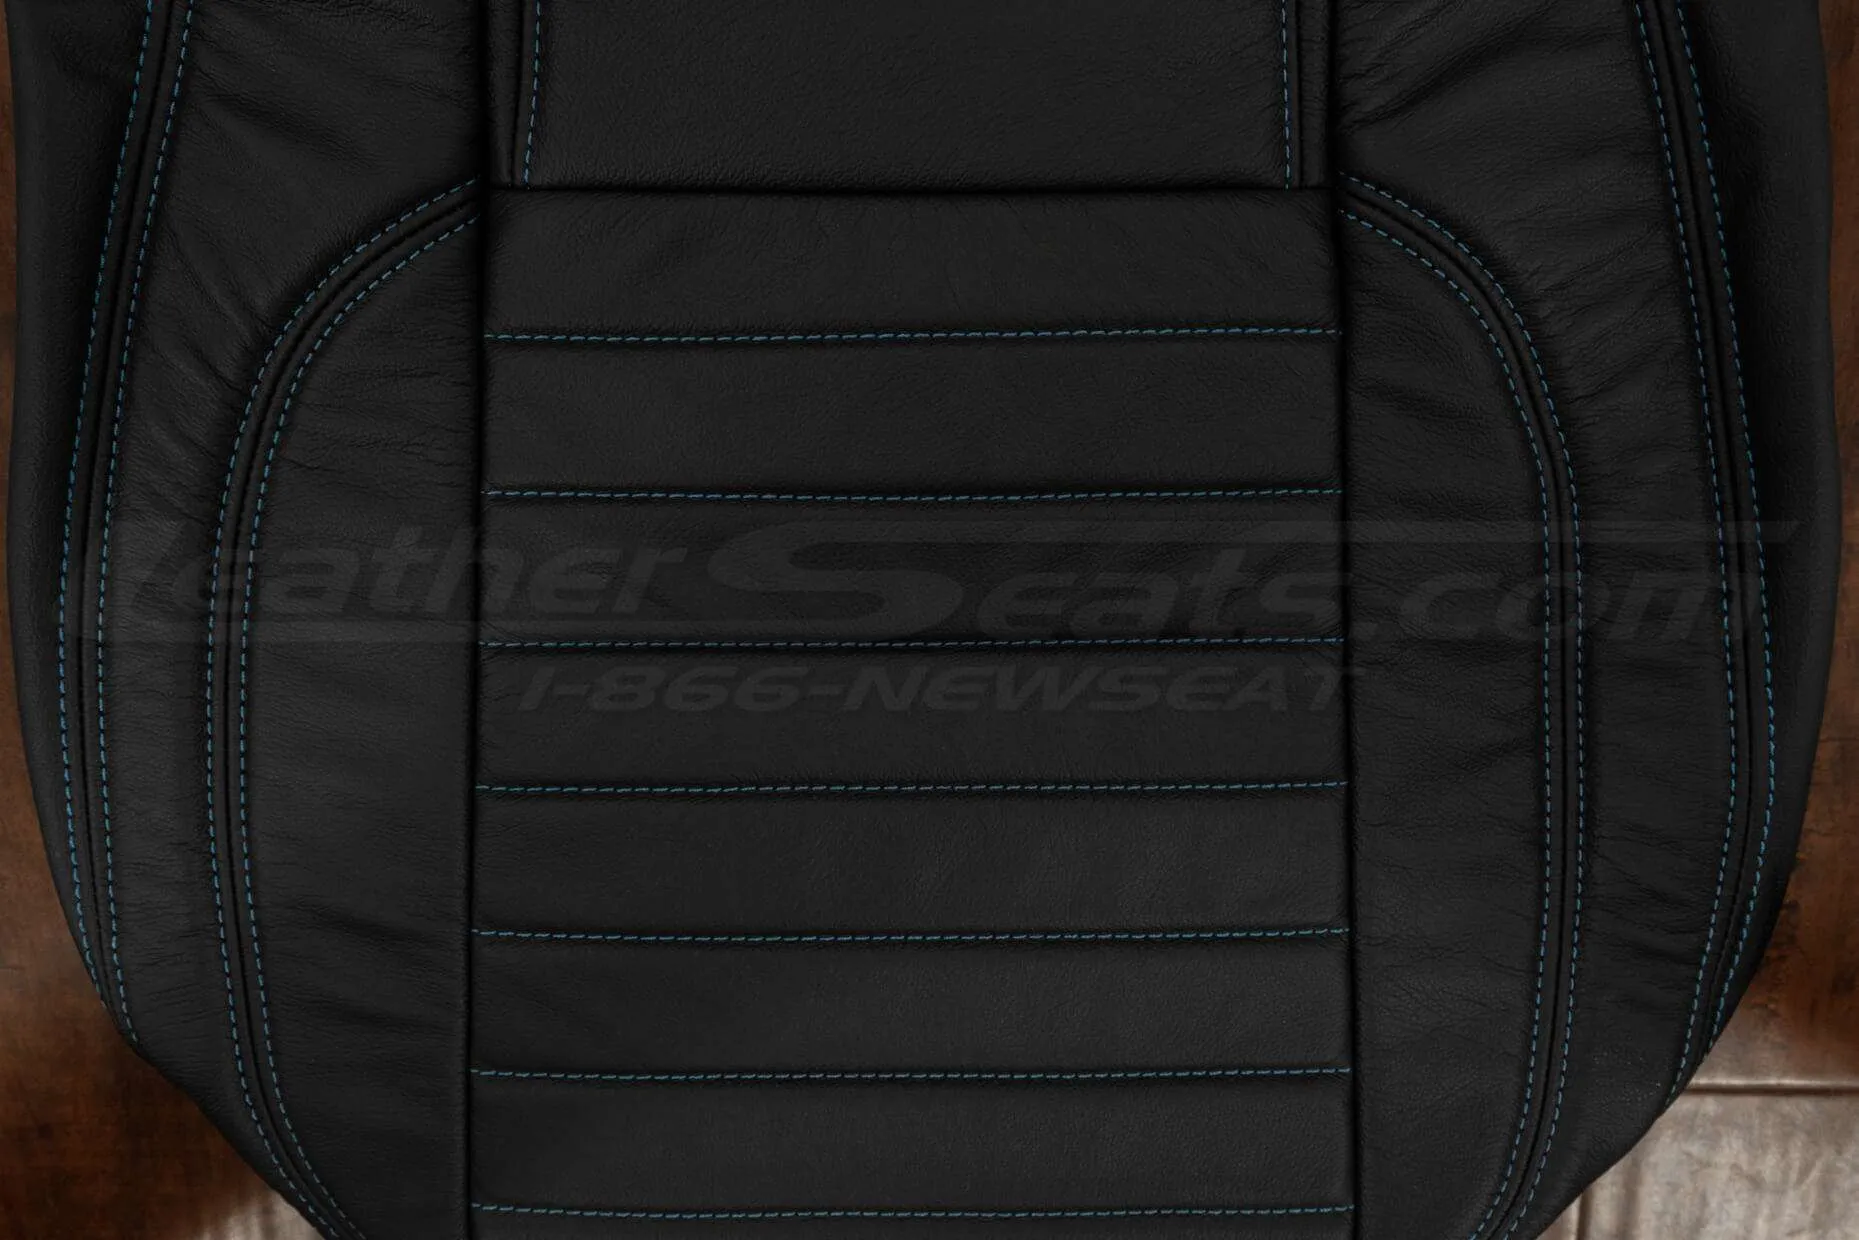 13-14 Ford Mustang Upholstery Kit - Black - Backrest inserts & stitching